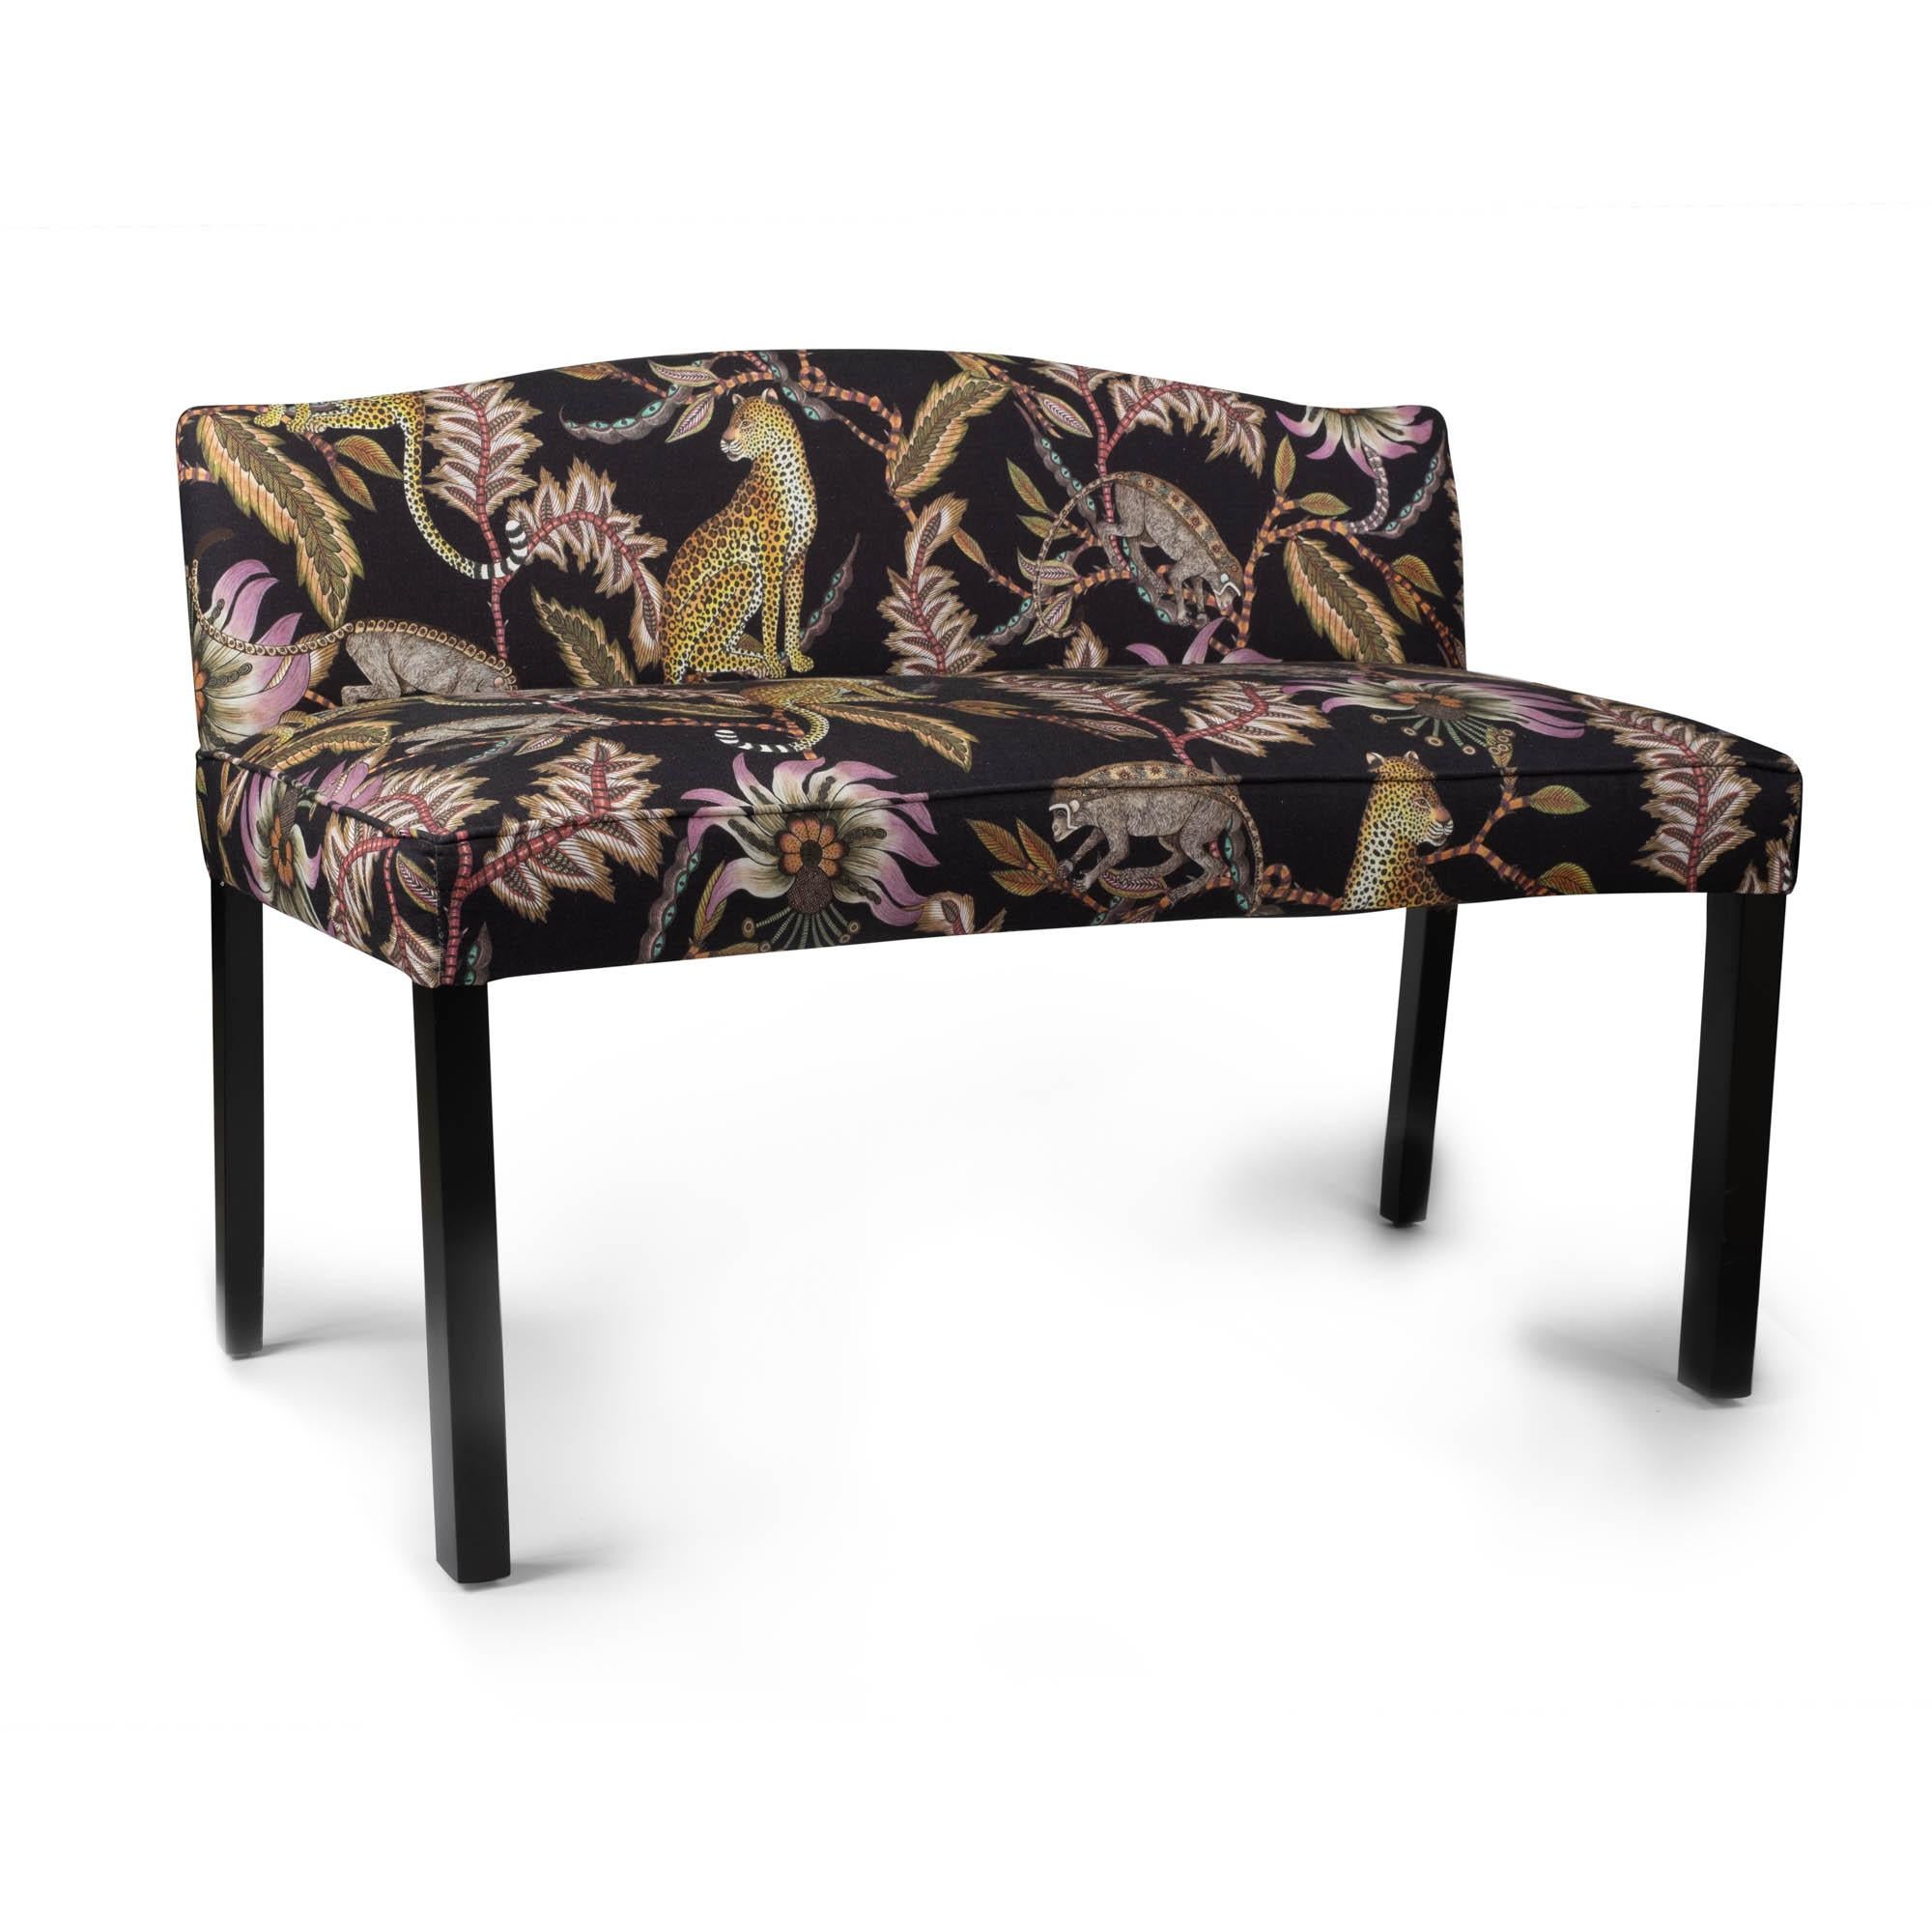 Designed by Ardmore and manufactured in Johannesburg, South Africa our made-to-order bench features Ardmore’s Monkey Bean velvet fabric, and may be specified in any of six available colorways.

PRODUCT INFORMATION
DIMENSIONS: 43